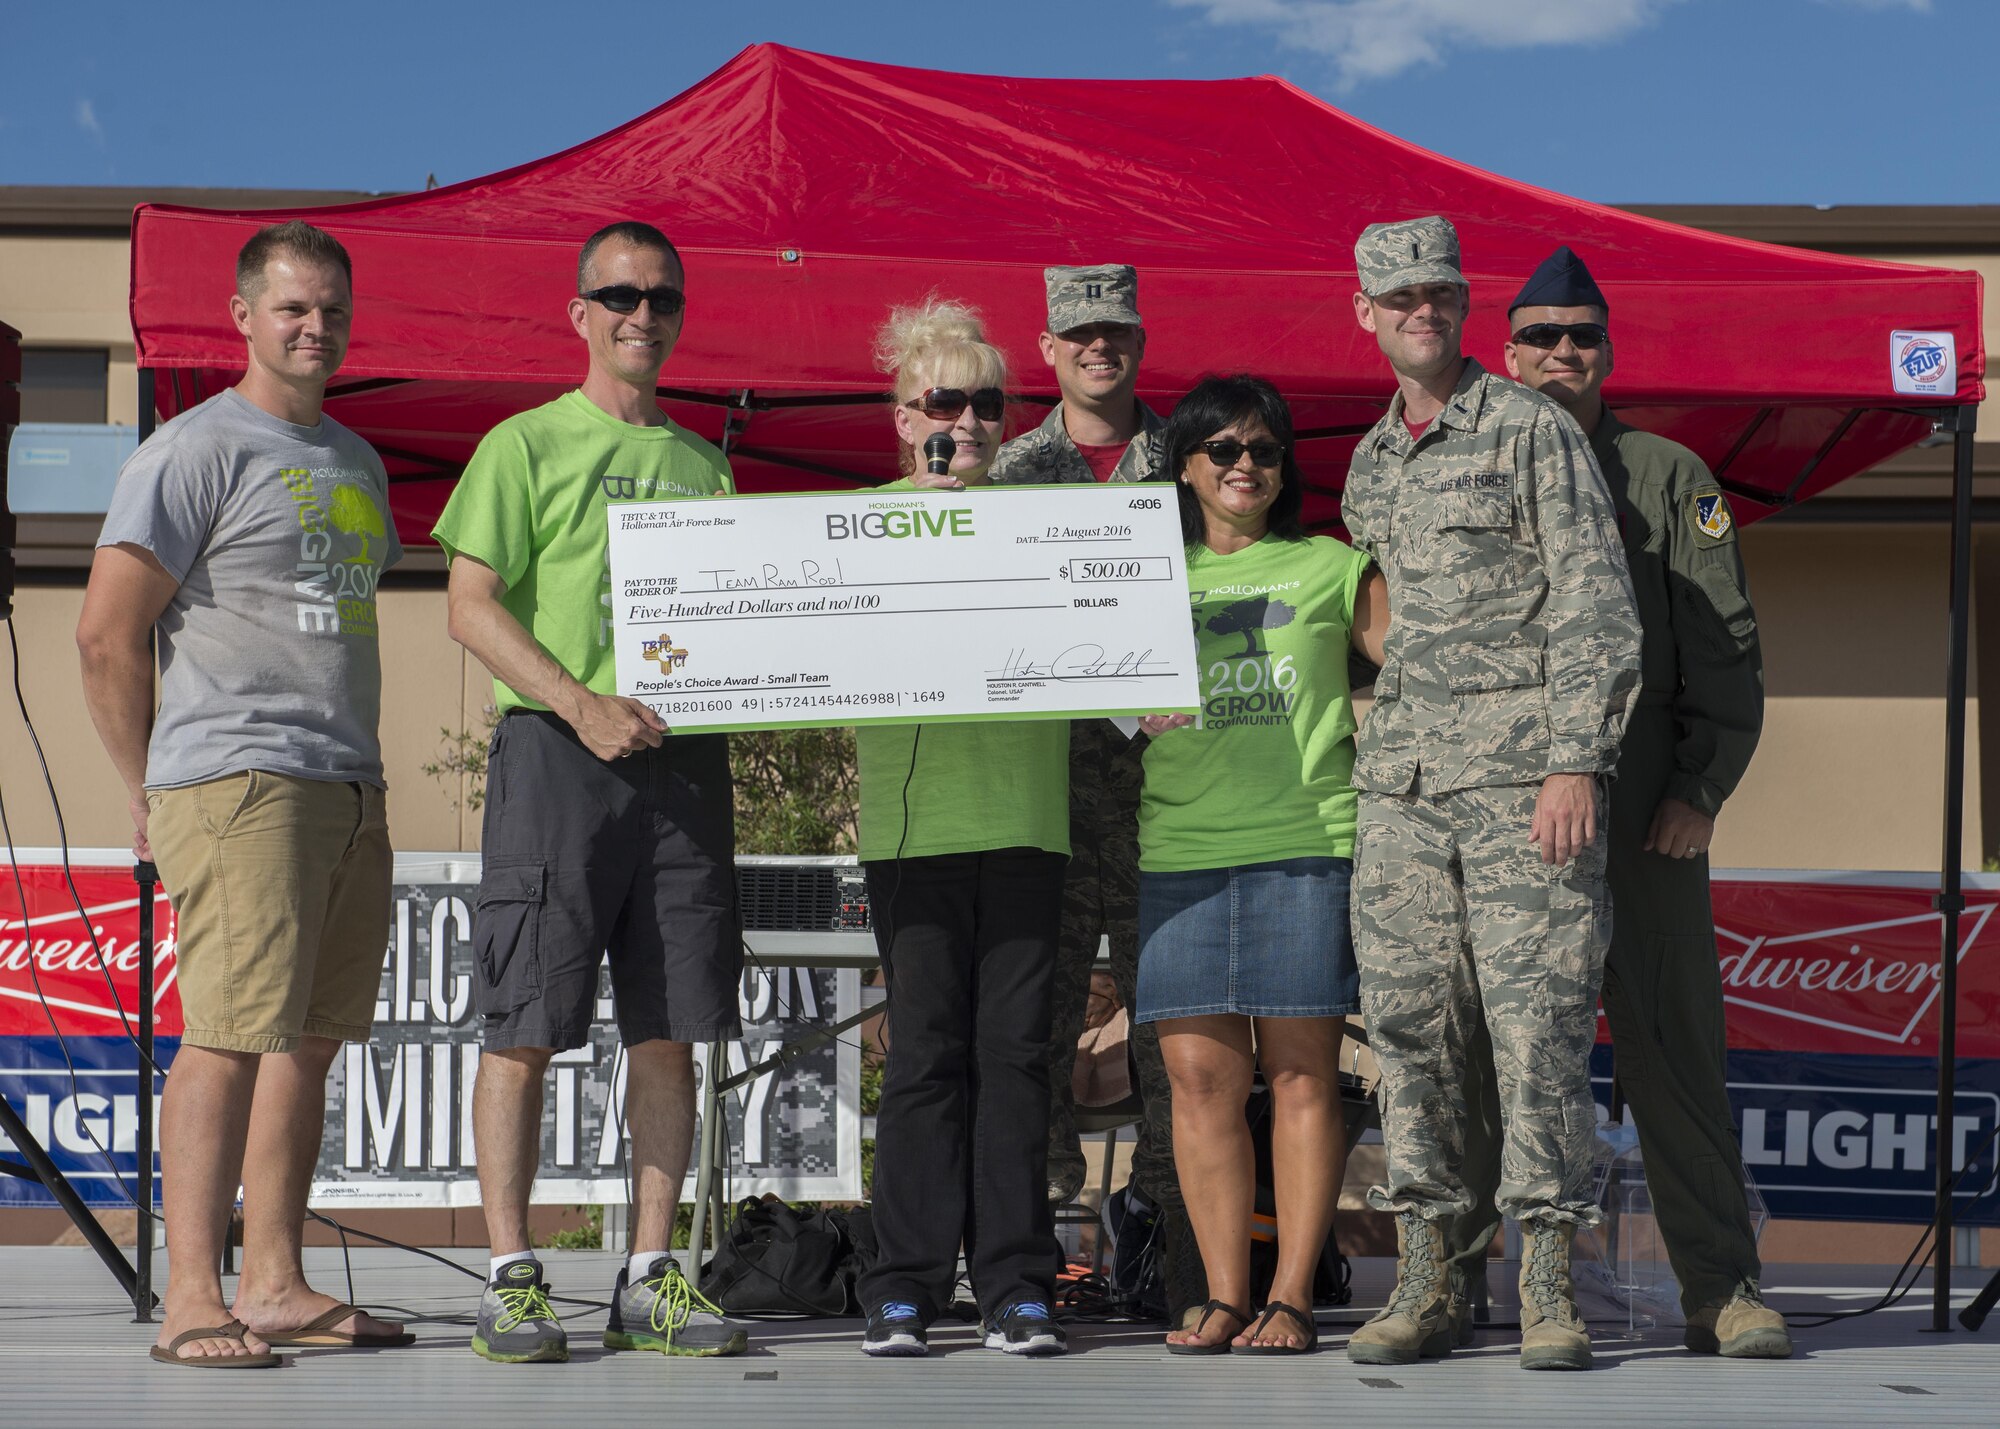 Members from the 49th Operation Support Squadron’s Team Ram Rod! receive their $500 reward for winning the People’s Choice Small Team Award during the Big Give after-party August 12, 2016 at Holloman Air Force Base, N.M. Over the course of three weeks, 32 teams of 412 participants spent nearly 5,000 man hours volunteering in the local community — saving the area $202,092.33. (Last names are being withheld due to operational requirements. U.S. Air Force photo by Airman 1st Class Randahl J. Jenson)